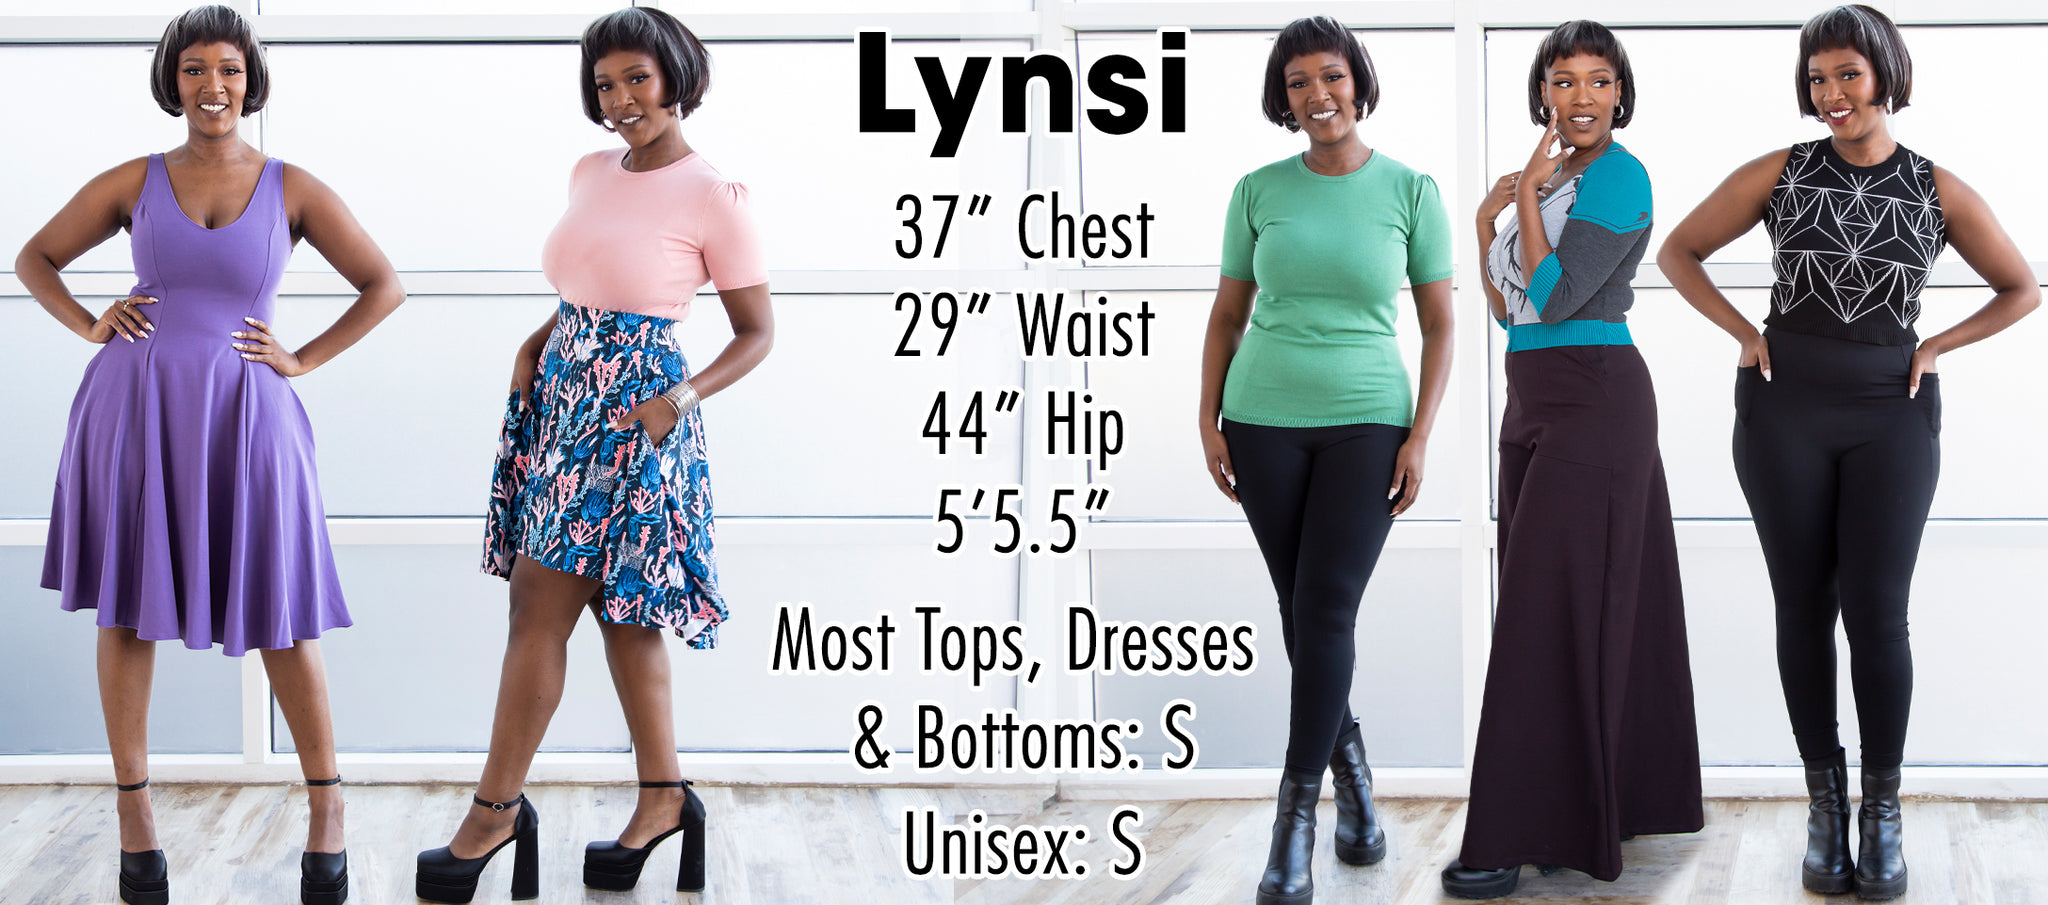 Lynsi - 37" Chest, 29" Waist, 44" Hips, 5'5.5". Tops, Bottoms, Dresses, and Unisex: S.